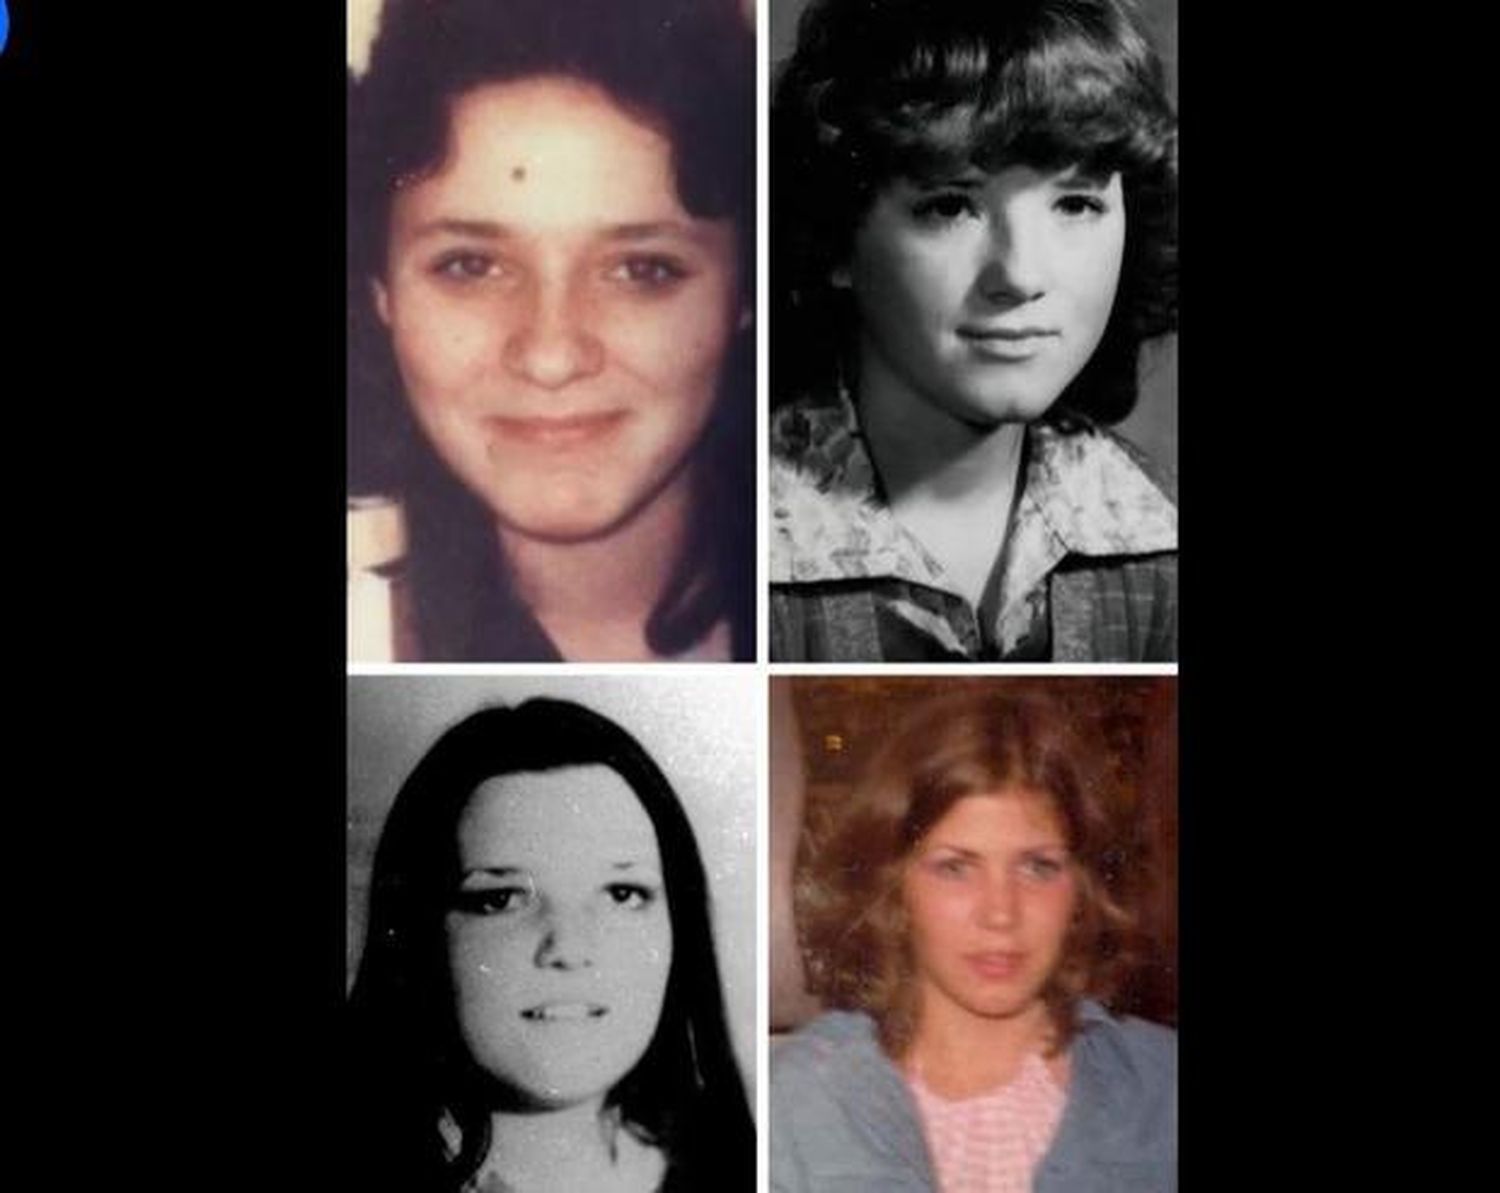 Canadian police announced Friday they have linked the cold case deaths of four young women -